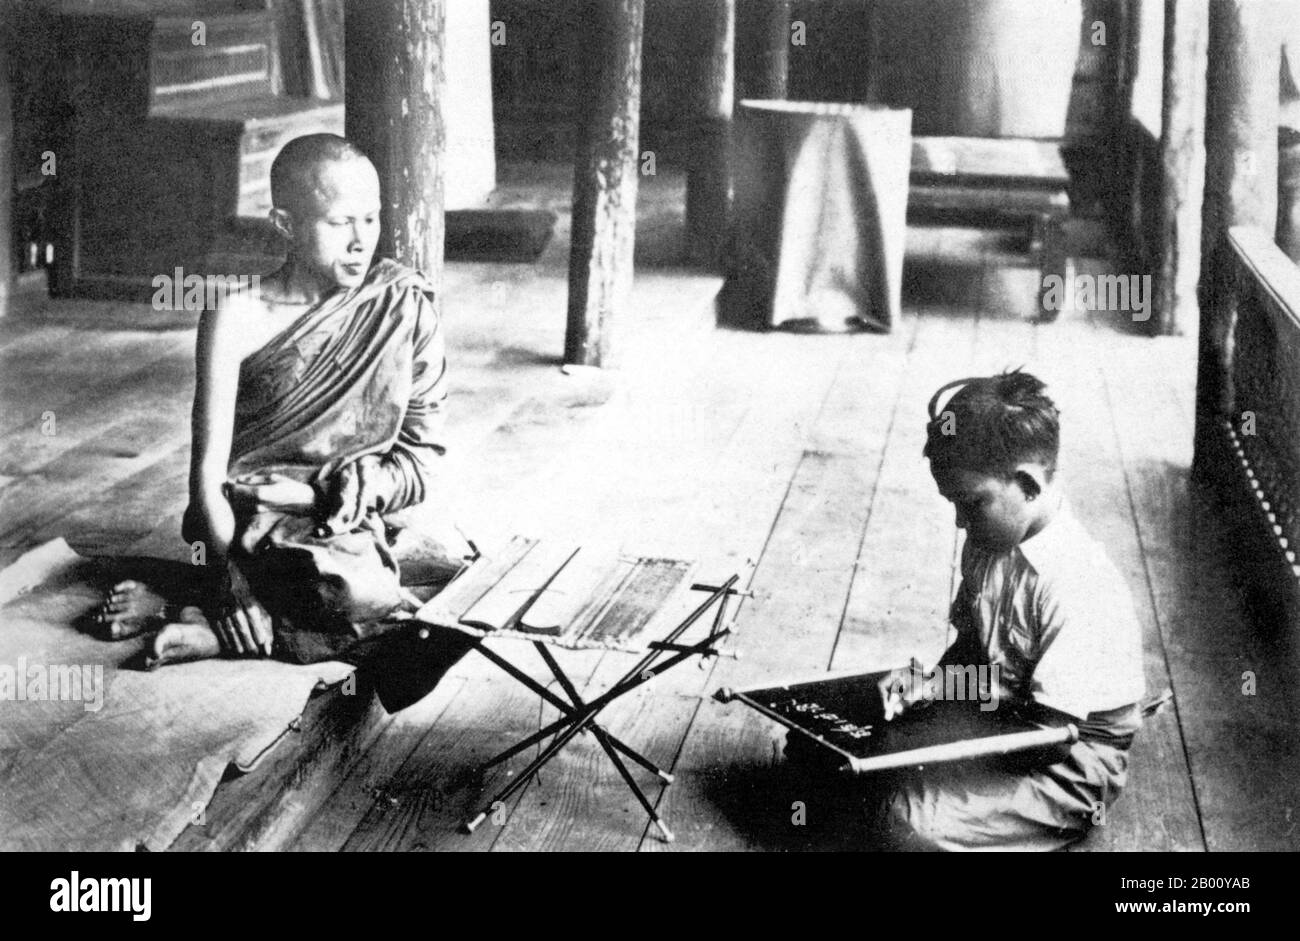 Thailand: A 1900 photograph of a Buddhist monk teaching a child in Nakhon Phanom in Isarn, northeastern Siam.  Nakhon Phanom, once the center of the ancient Sri Kotrabun Kingdom, lies adjacent to the Mekong River, 735 kms northeast of Bangkok. The area was long settled by ethnic Lao people and belonged to the Lan Xang Kingdom even after it came under the control of Ayutthaya. At first it was known as 'Si Kotrabun', and during the times of King Rama I as 'Maruka Nakhon'. Stock Photo